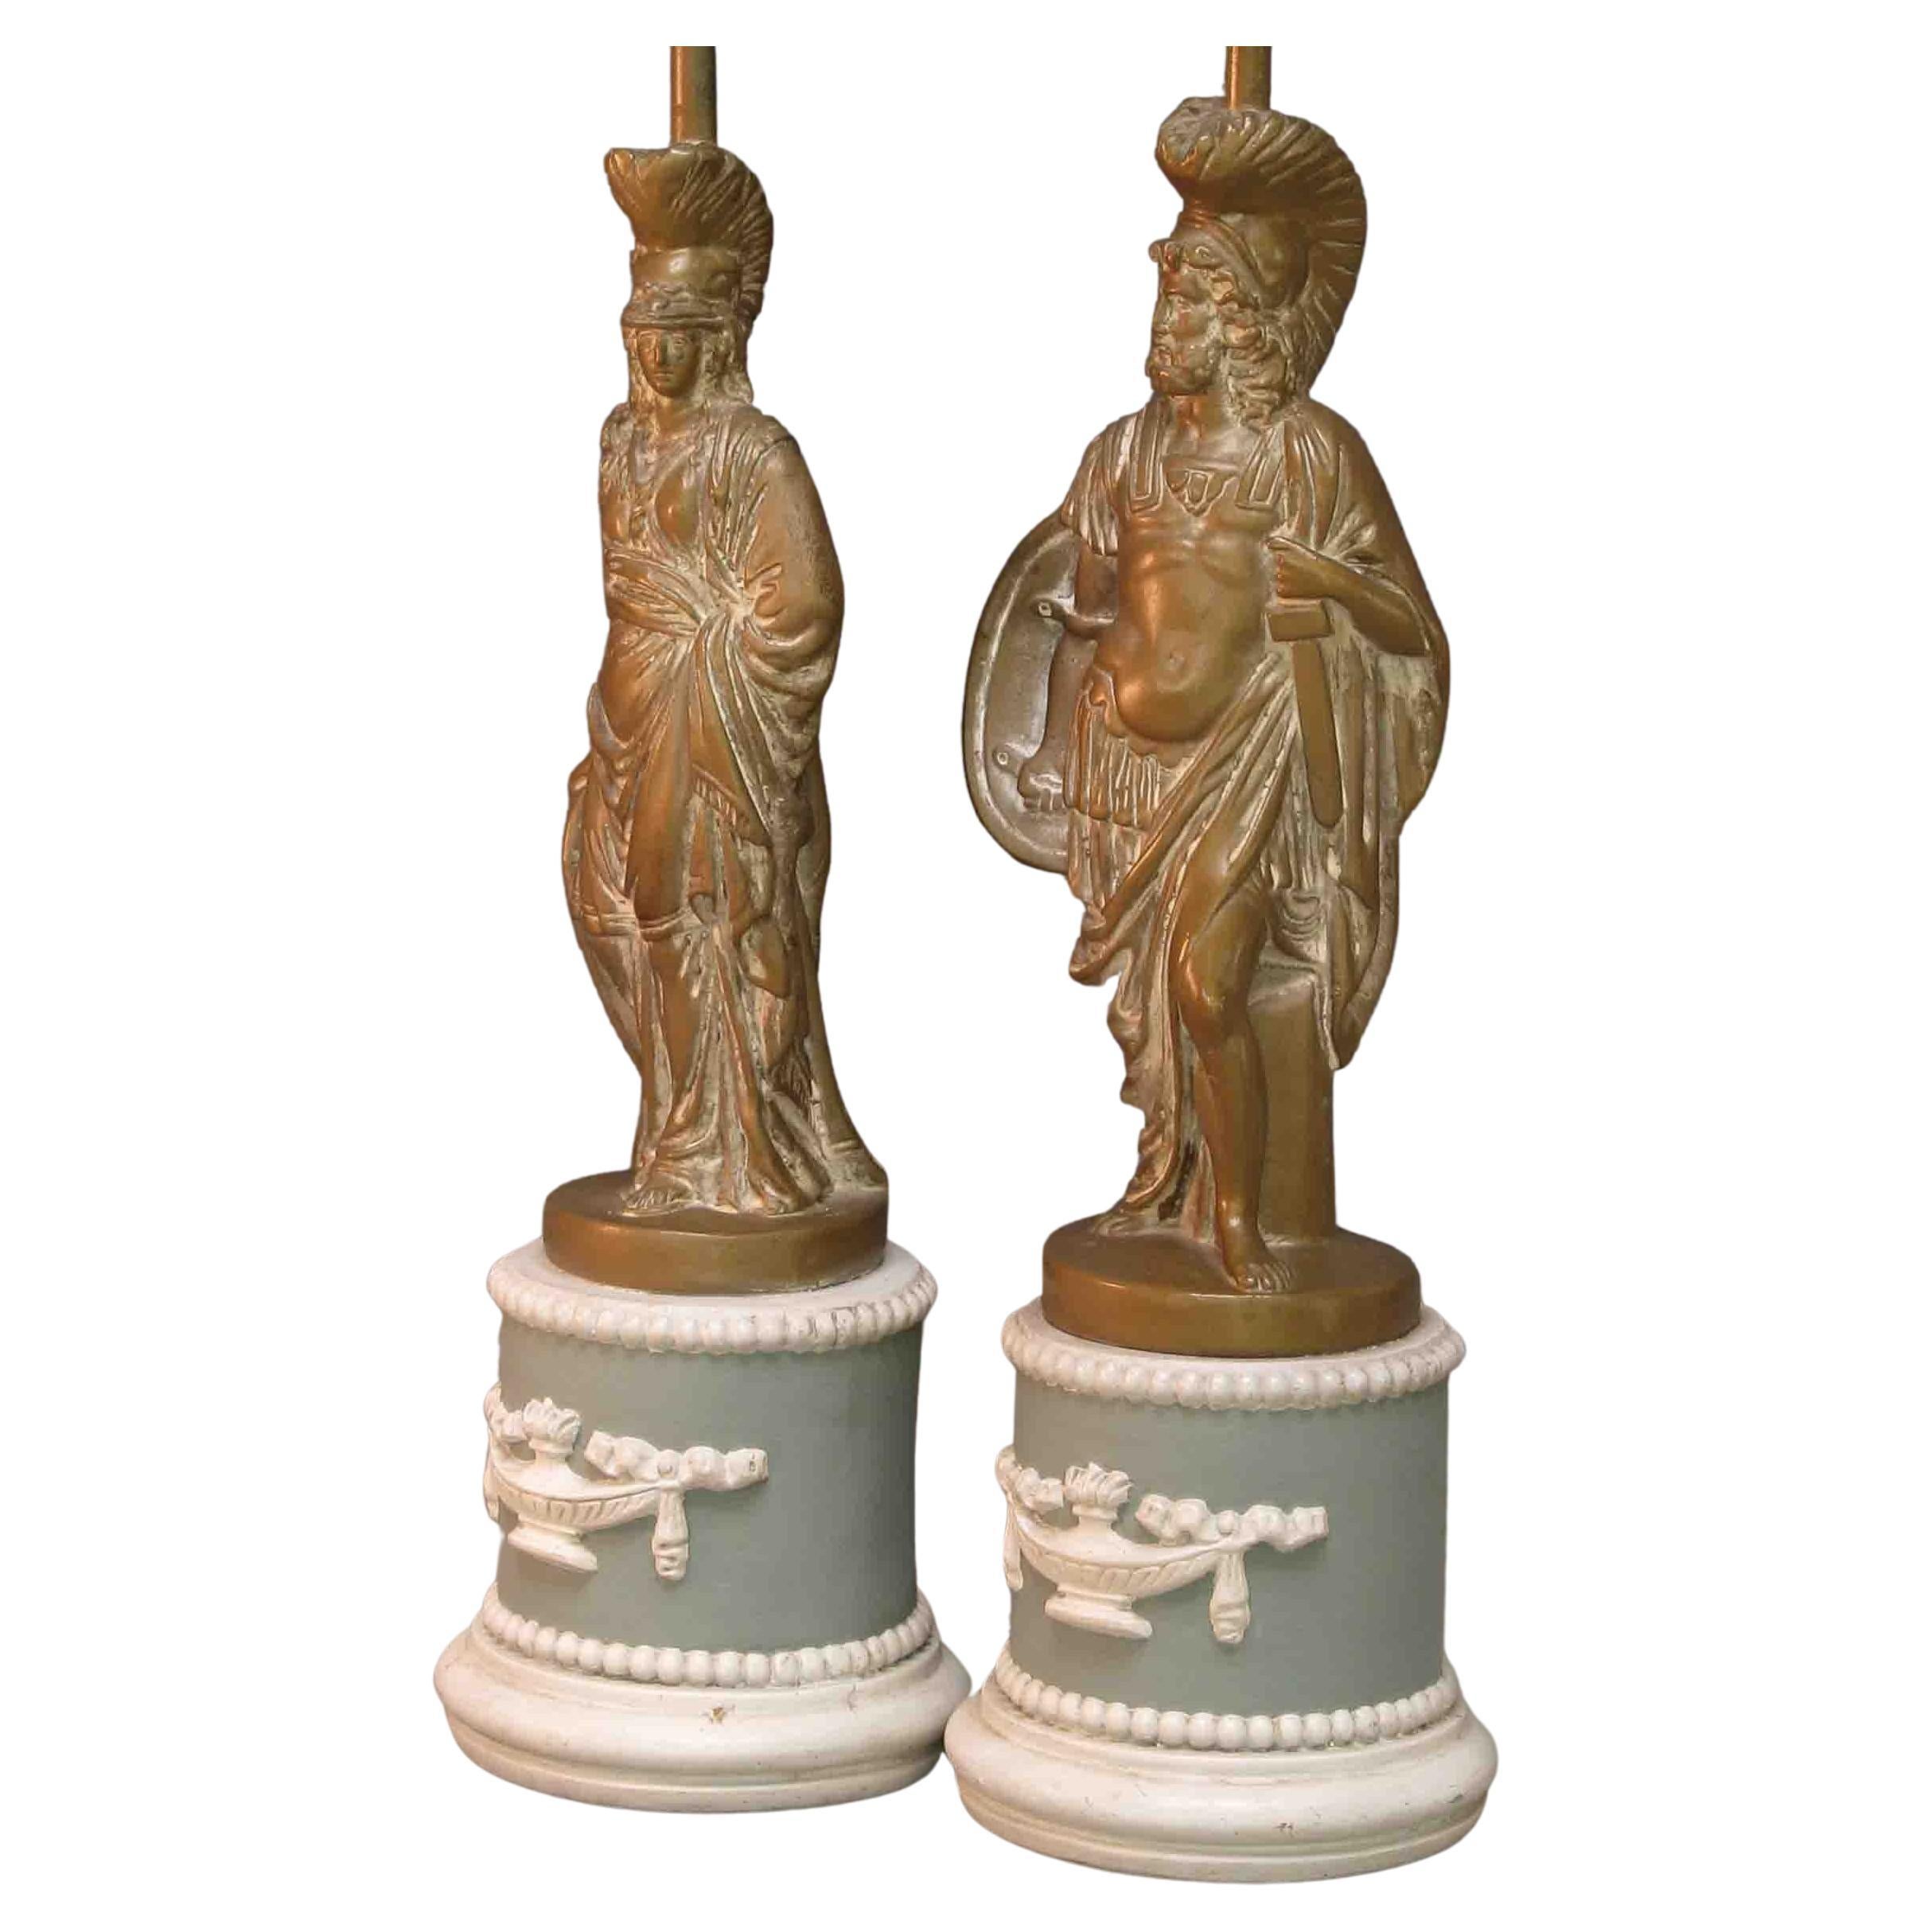 Pair of Patinated Plaster Neoclassical Figural Table Lamps by Sculptureline N.Y. For Sale